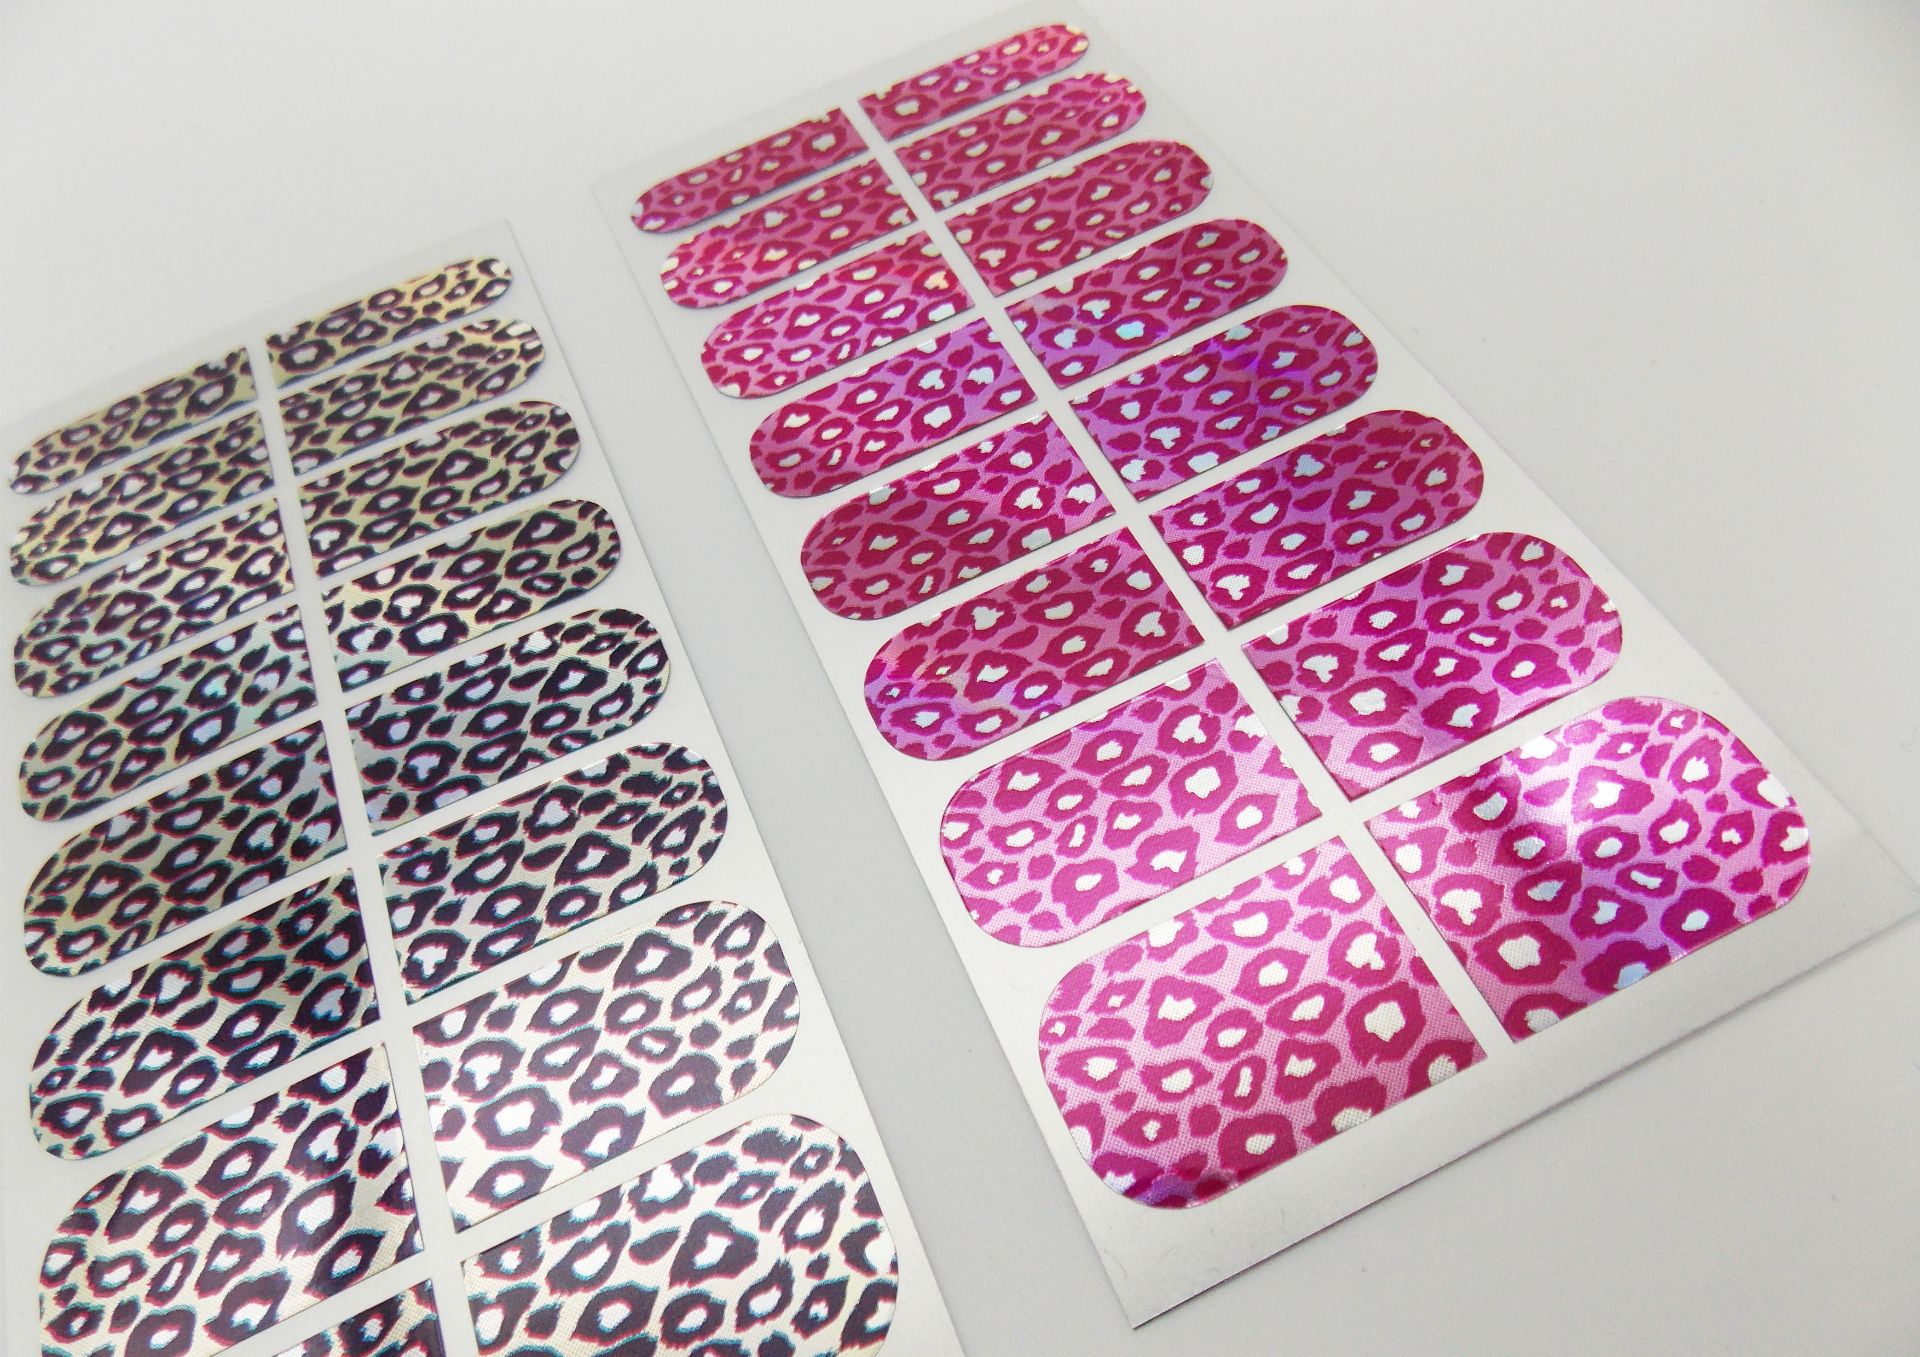 144 Packs Of Professional Nail Art Wrap Transfers - 3 Different Animal Print Styles - Image 9 of 9